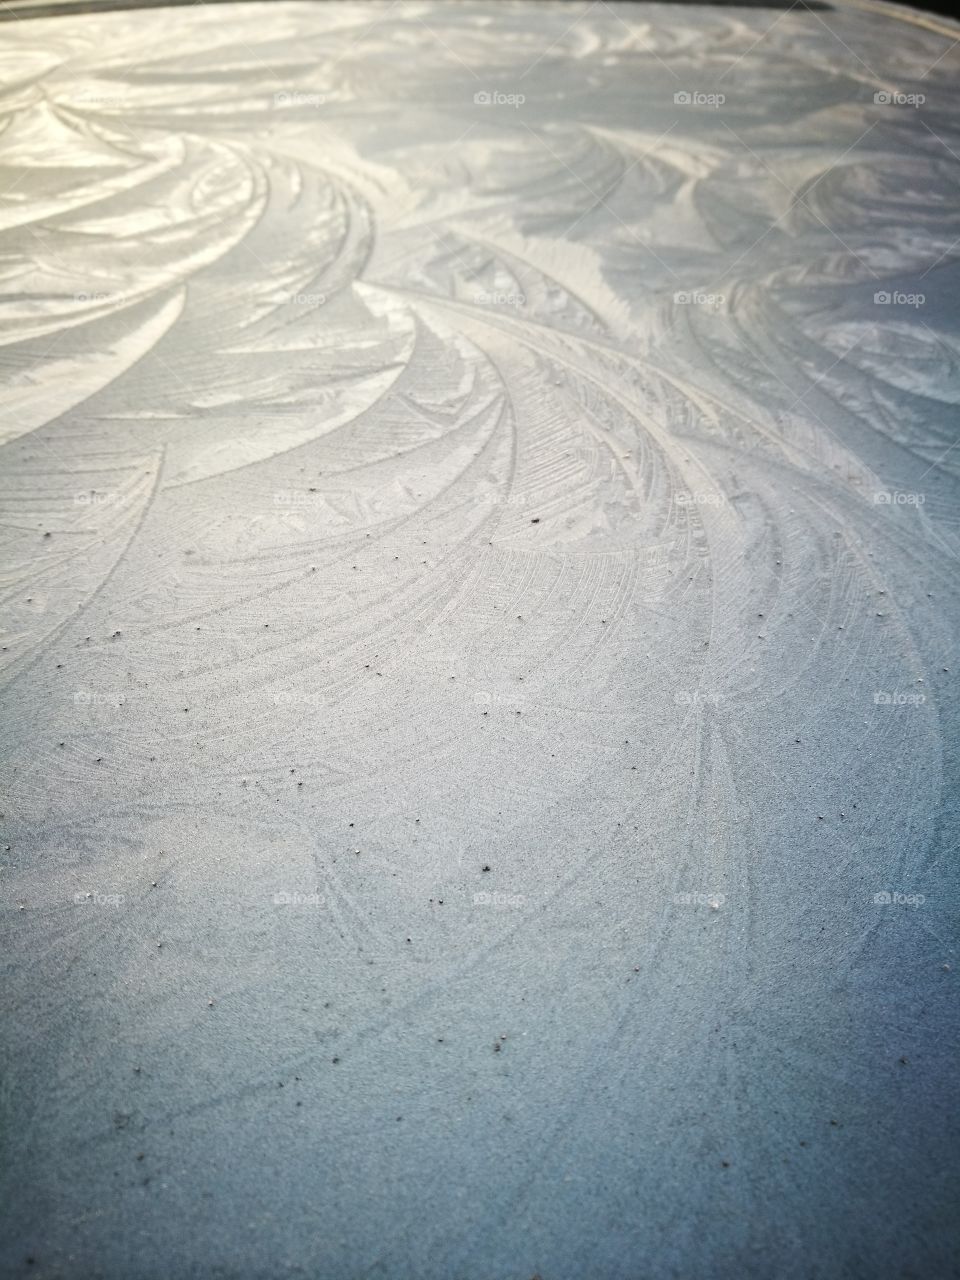 Frosty morning on the car